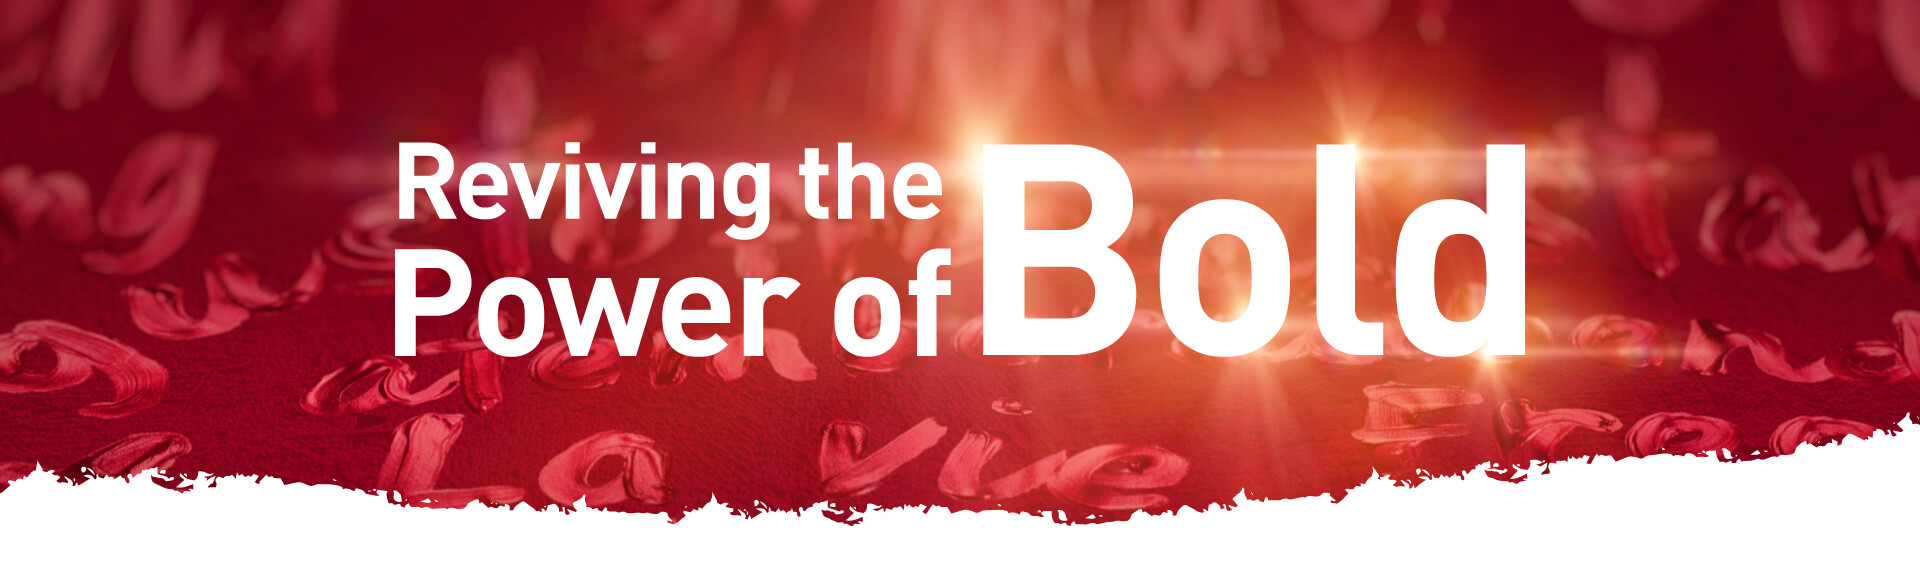 bright red background with the words 'Reviving the power of bold'